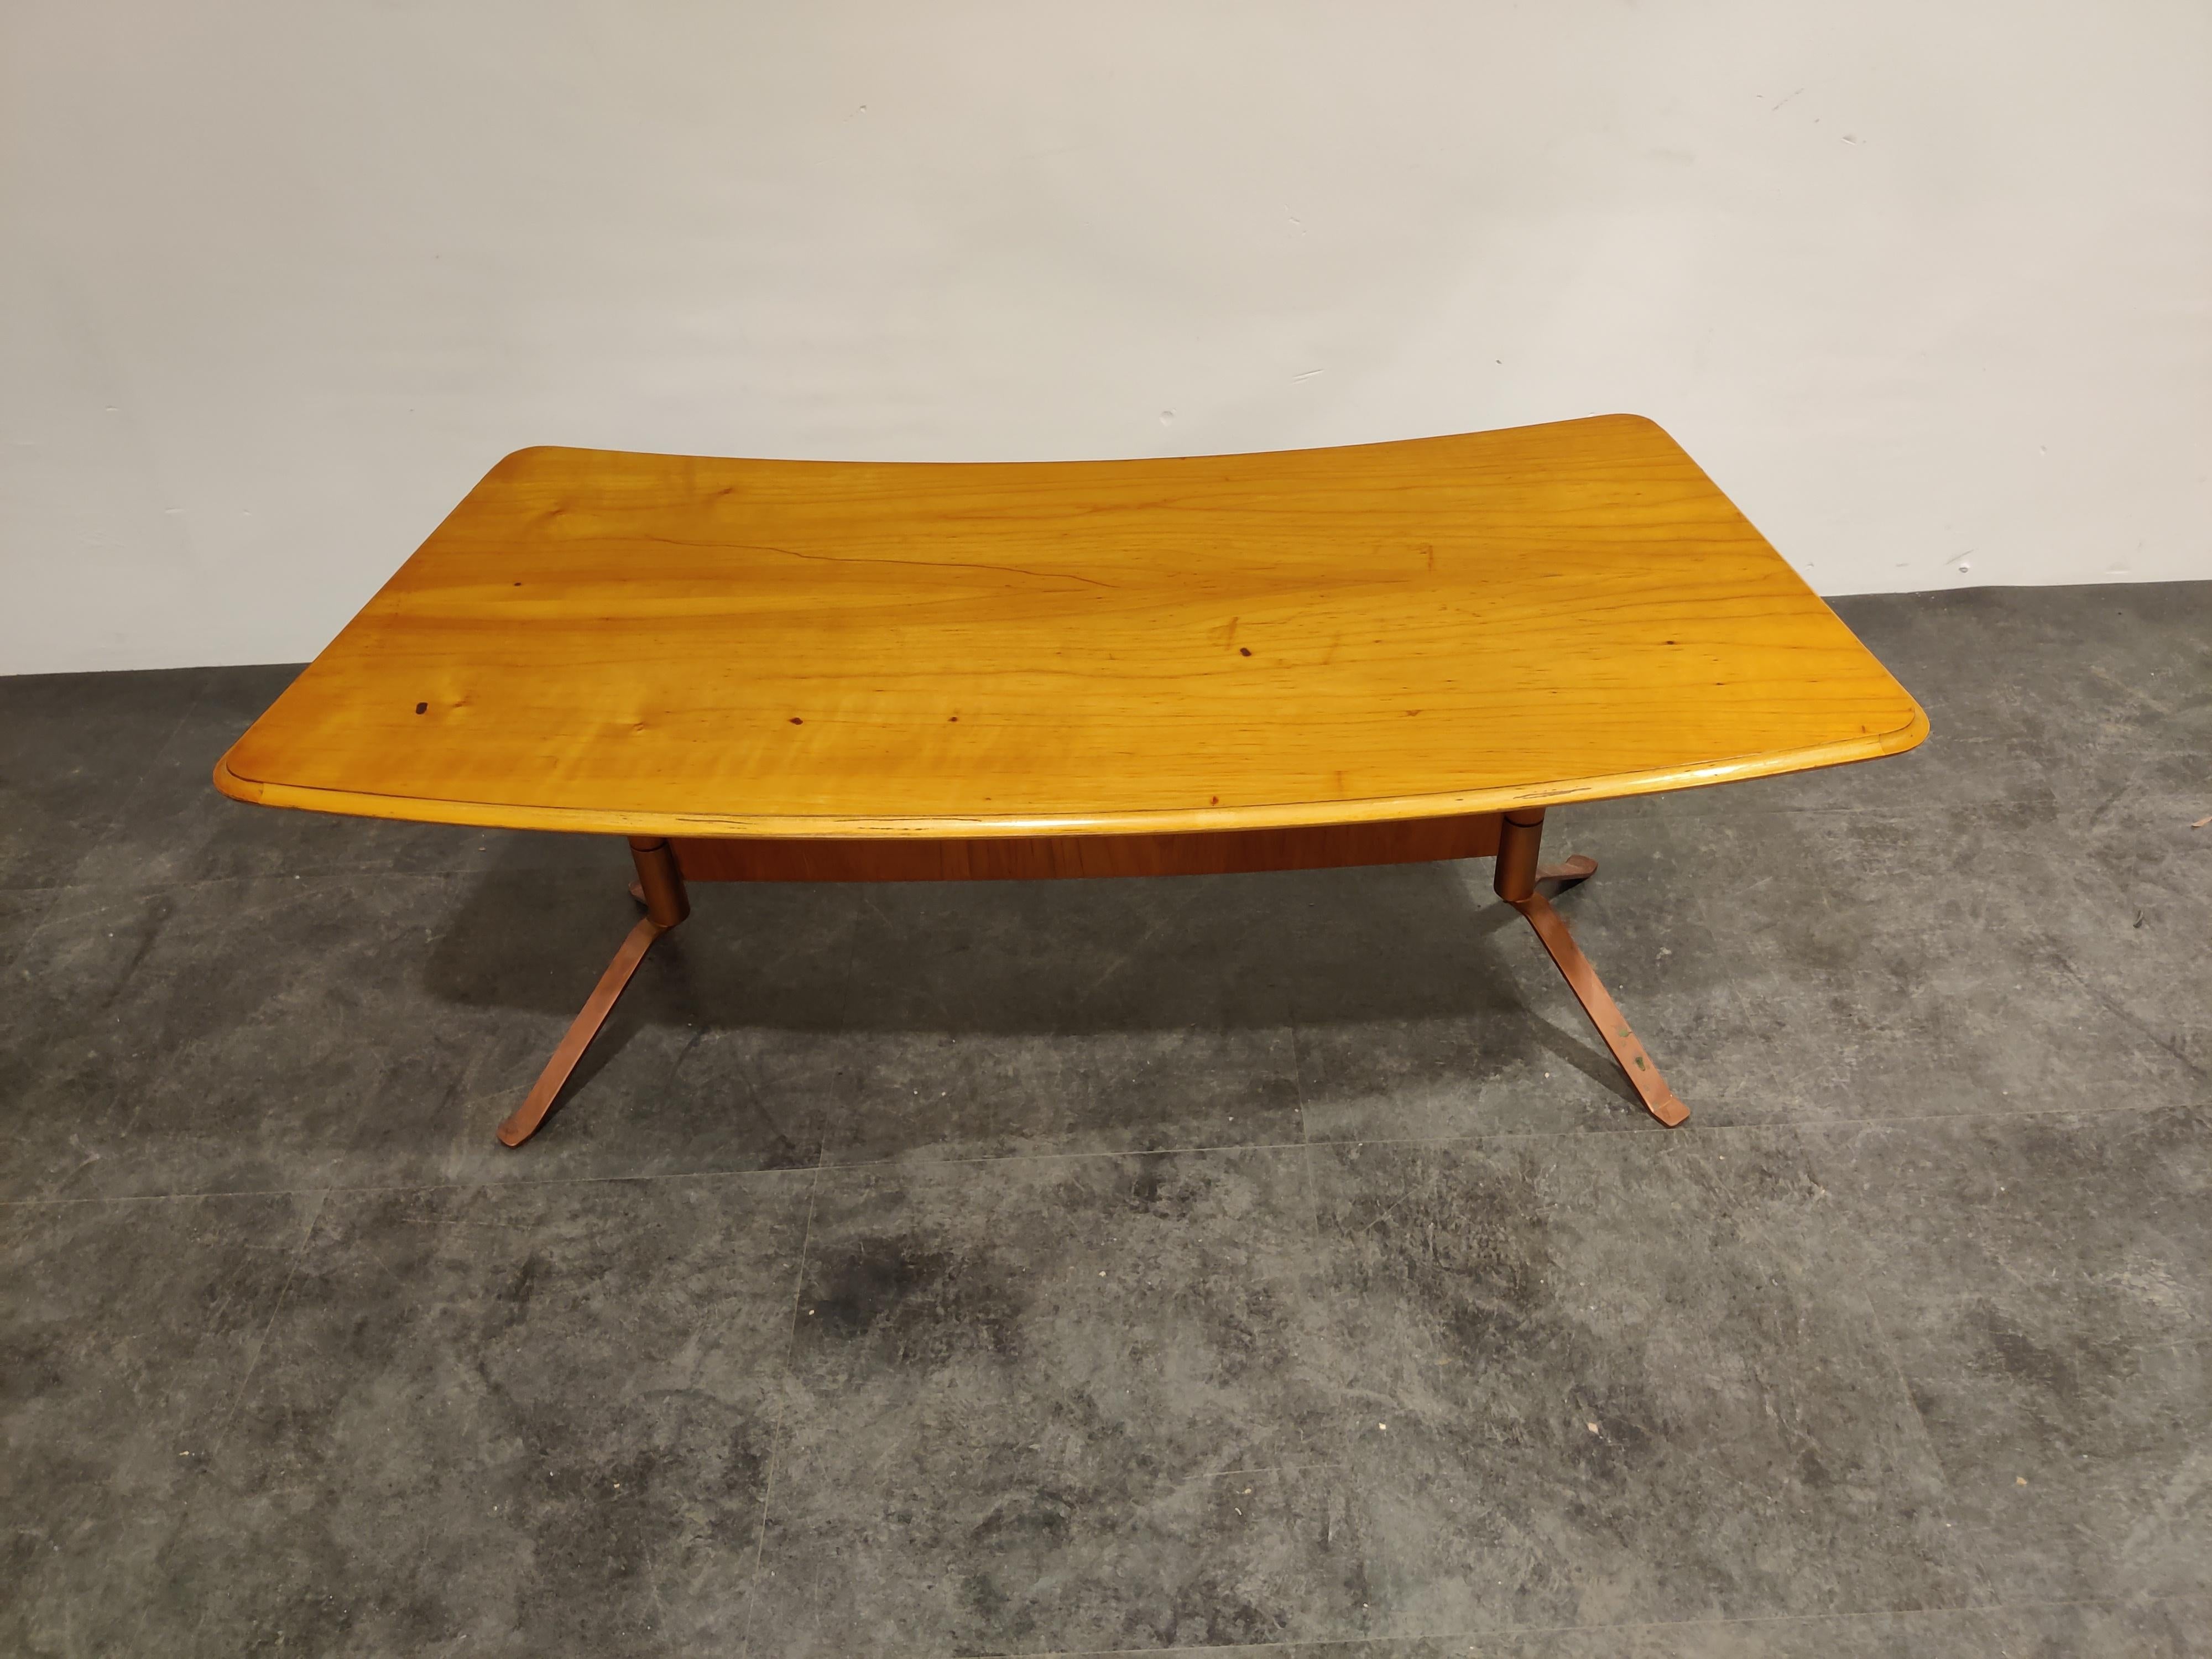 Midcentury curved coffee table made from pine wood and copper legs.

Stamped underneath, but no manufacturer/designer could be linked.

Made in Germany, circa mid-1960s

Good condition.

Dimensions:
Height 50cm/19.68